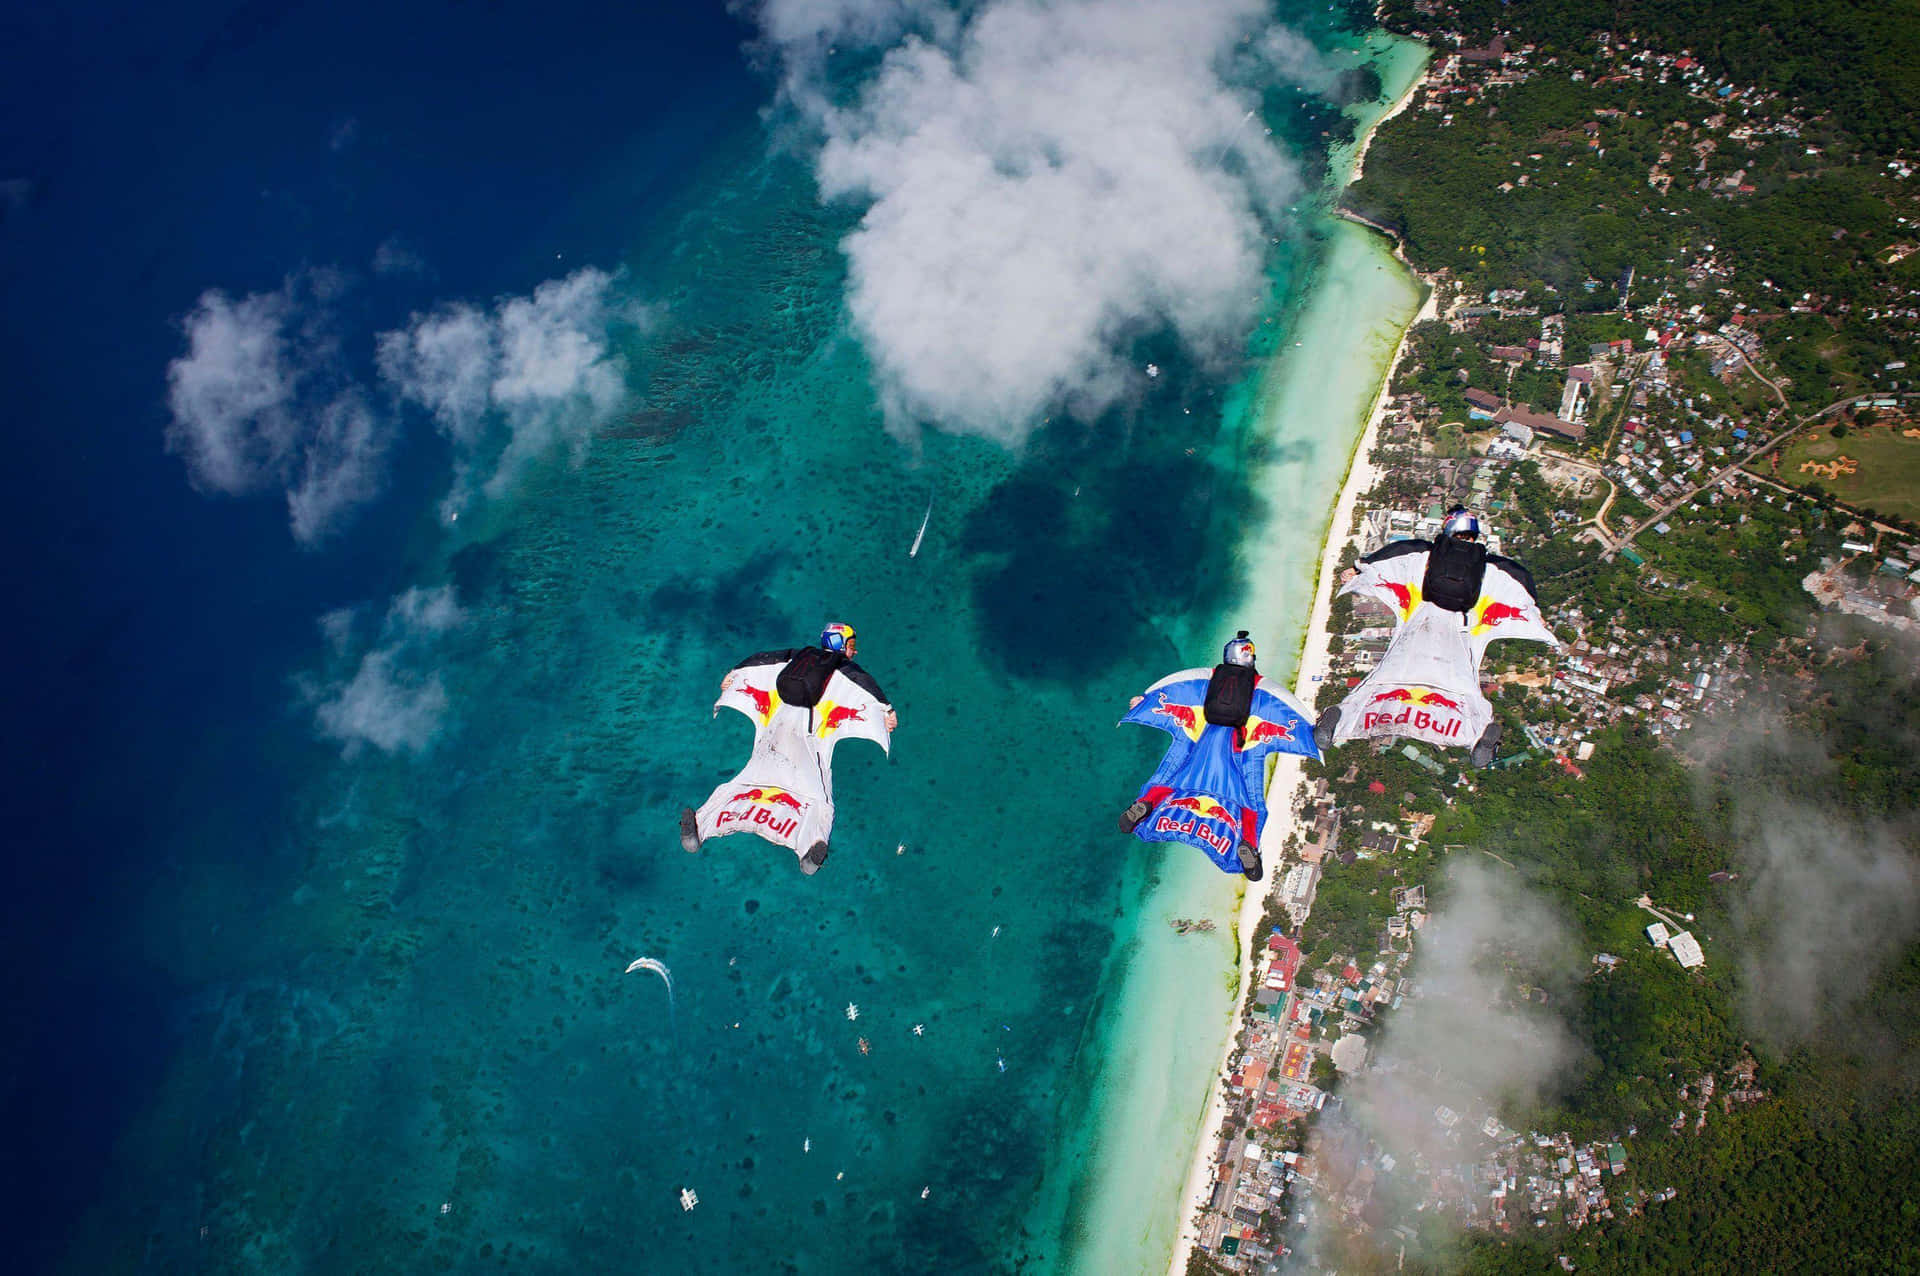 Defy Fear by Skydiving